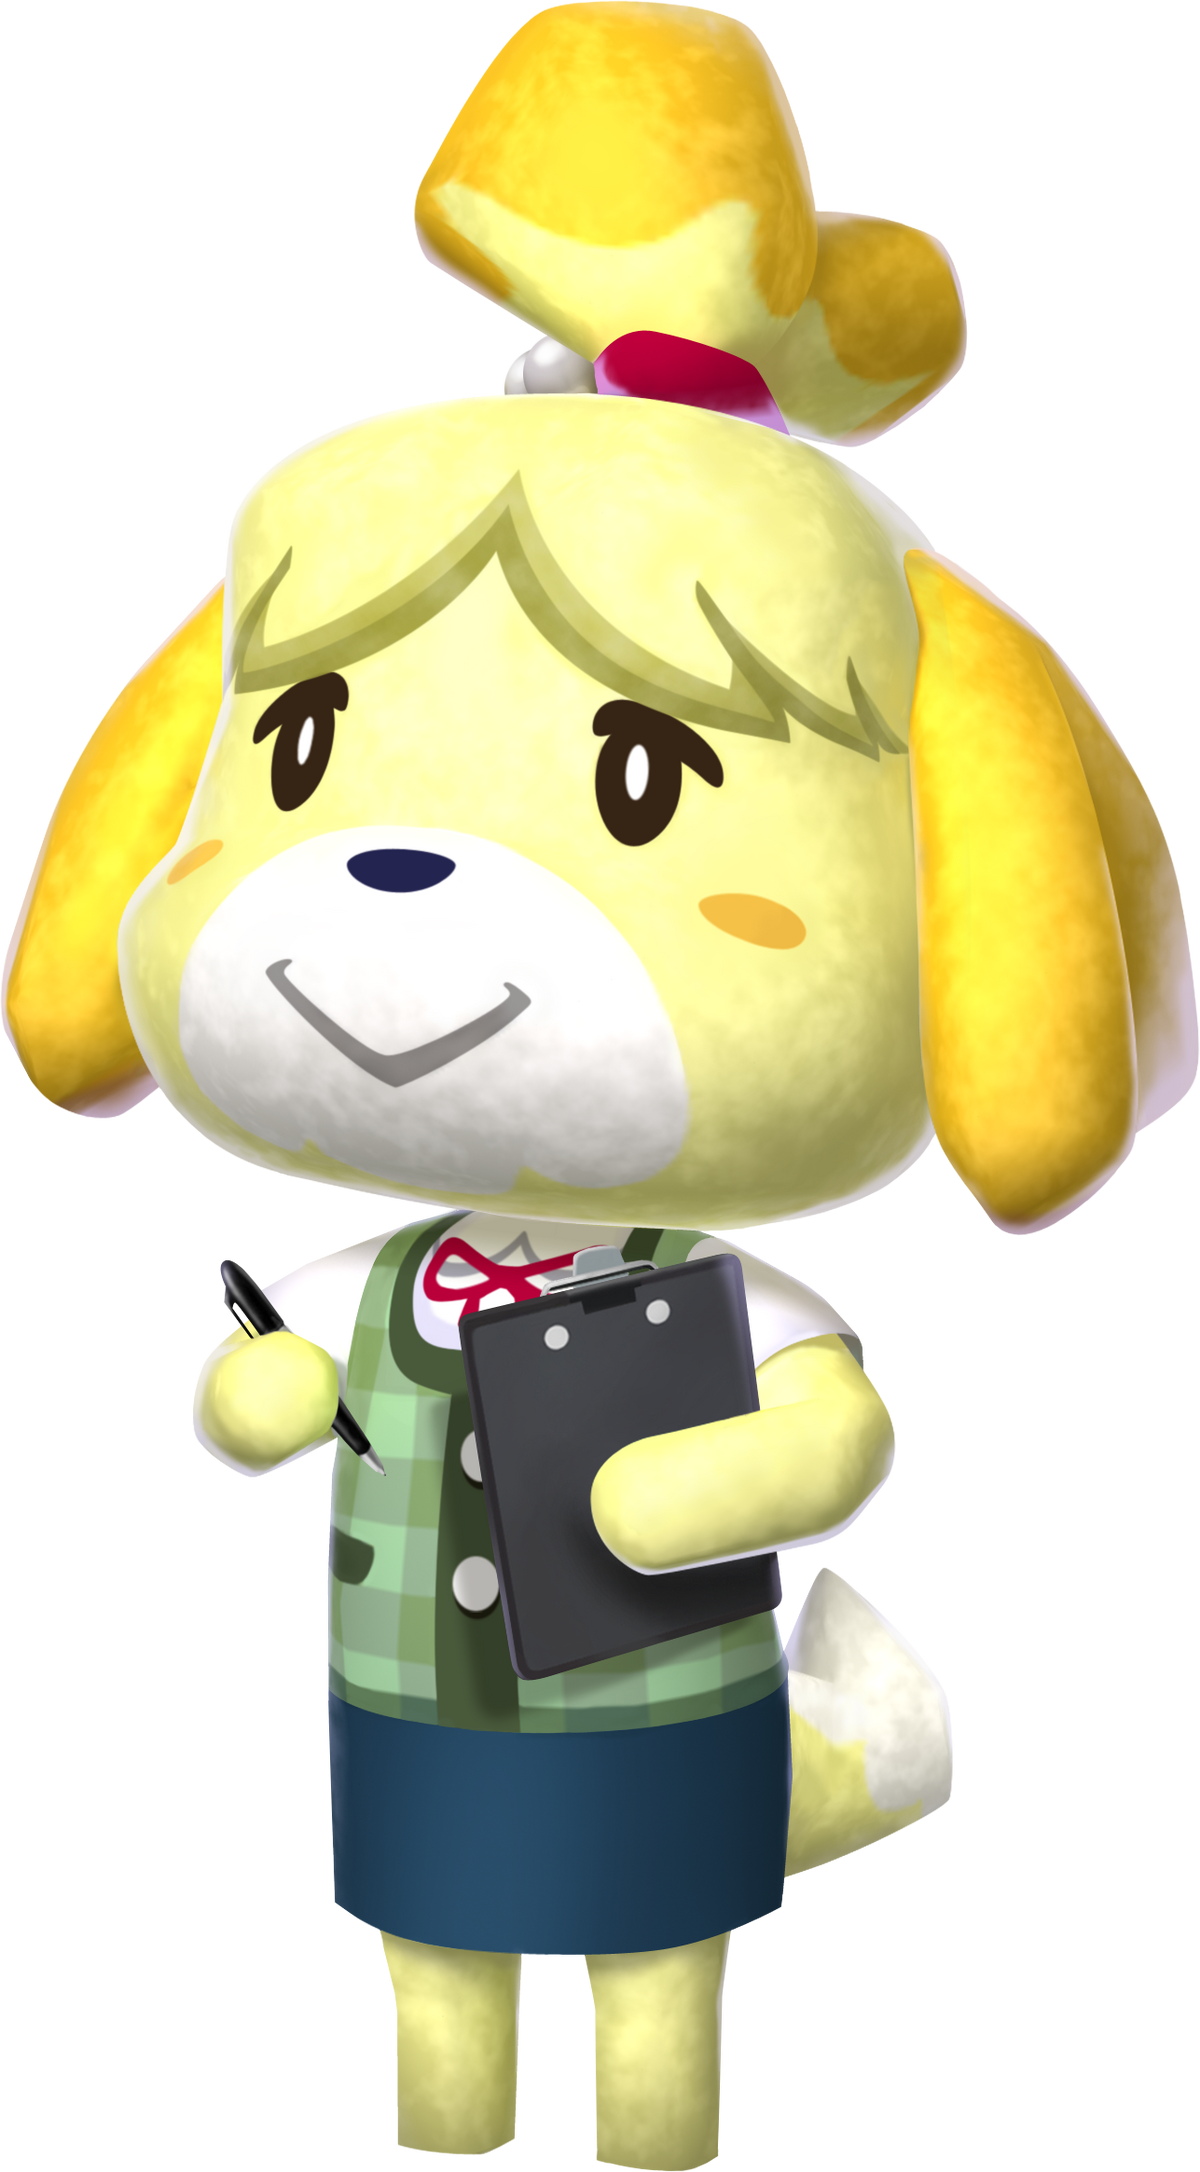 https://static.wikia.nocookie.net/fantendo/images/d/d9/Isabelle.png/revision/latest/scale-to-width-down/1200?cb=20151227172845